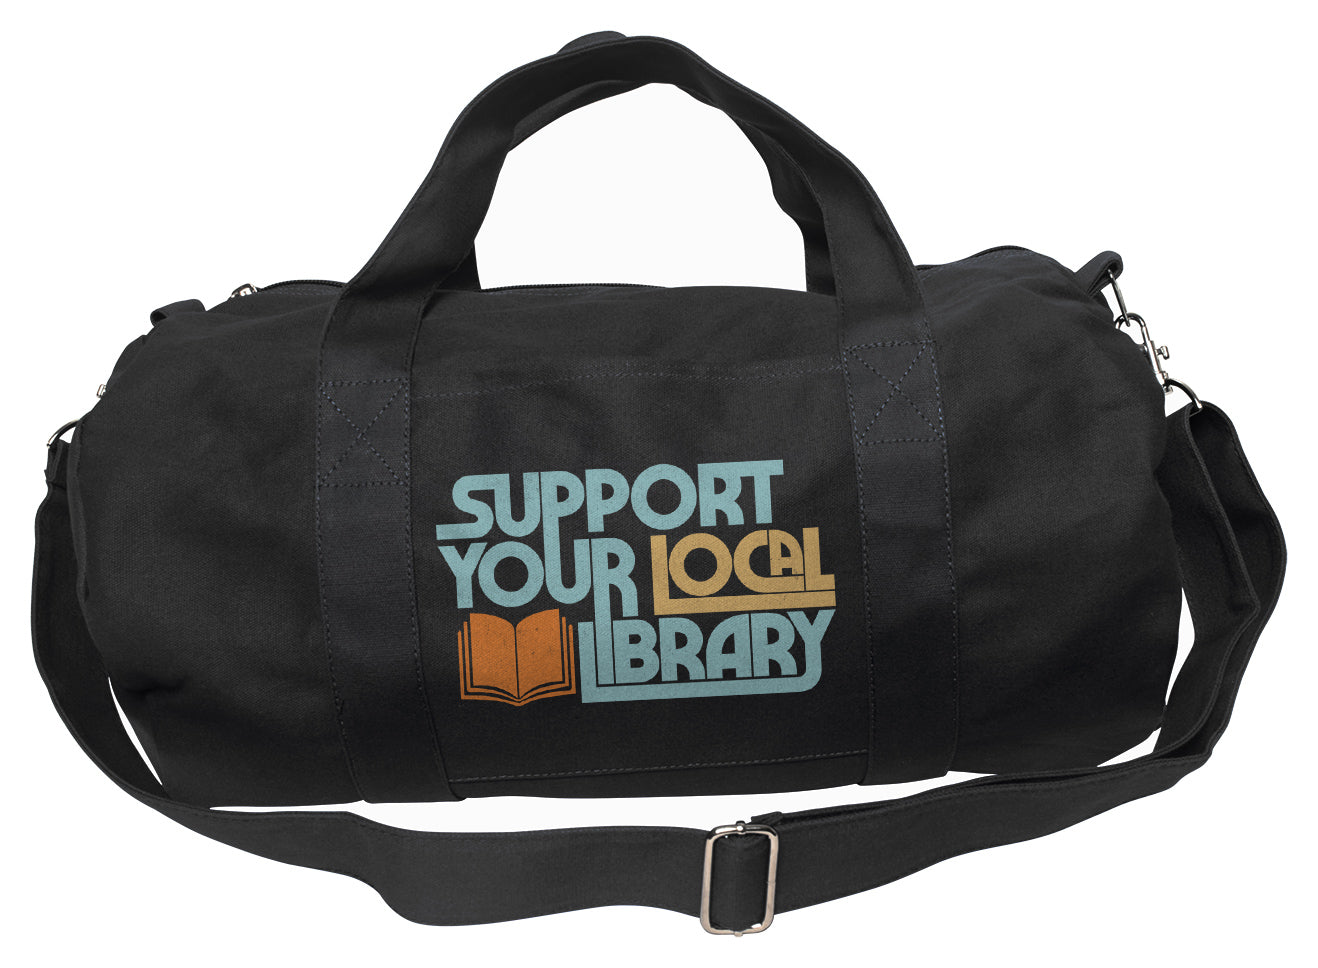 Support Your Local Library Duffel Bag